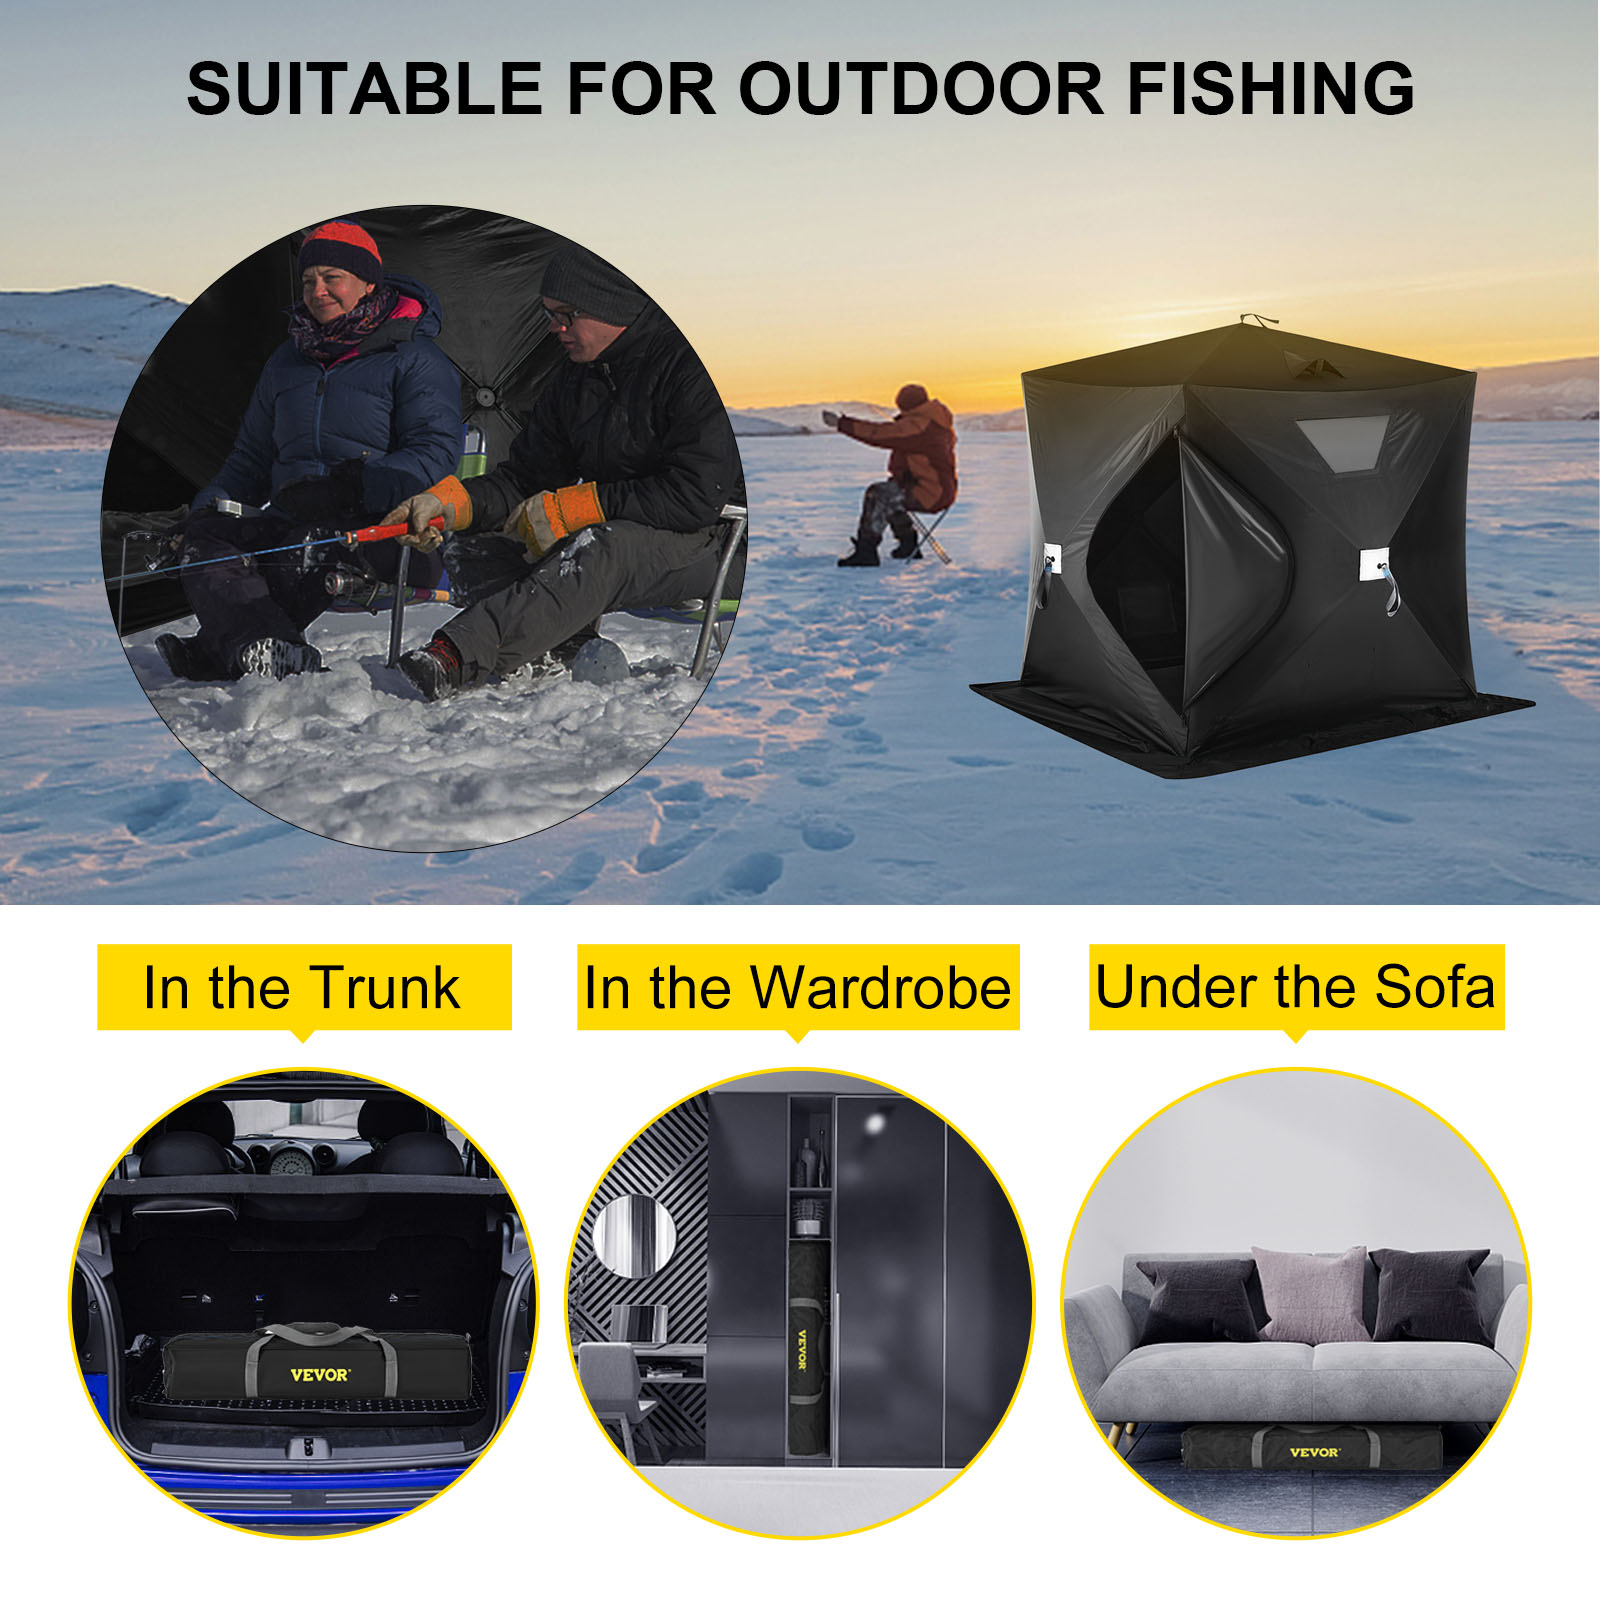 Portable Ice Shelter Pop-Up Ice Fishing Tent Shanty 3-4 Person, 2 Person